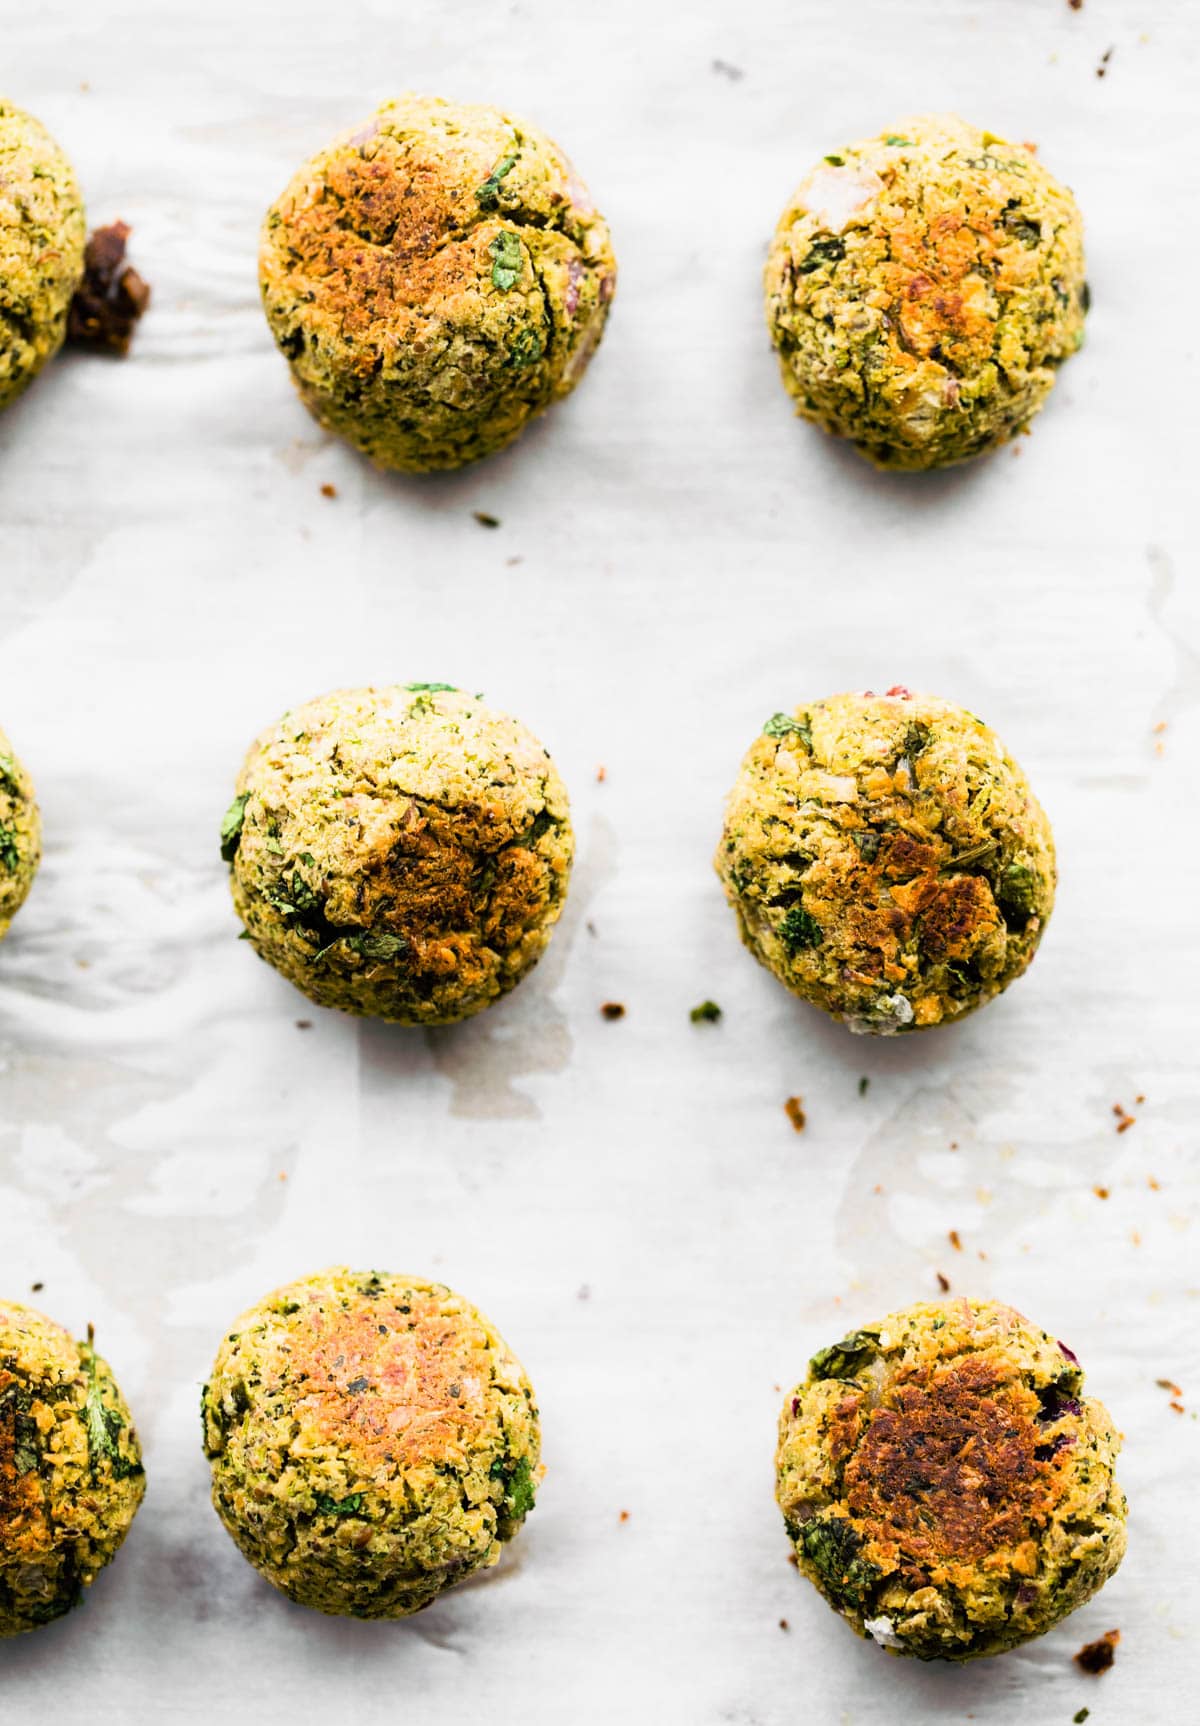 Baked Mexican vegan falafel balls lined up on parchment paper